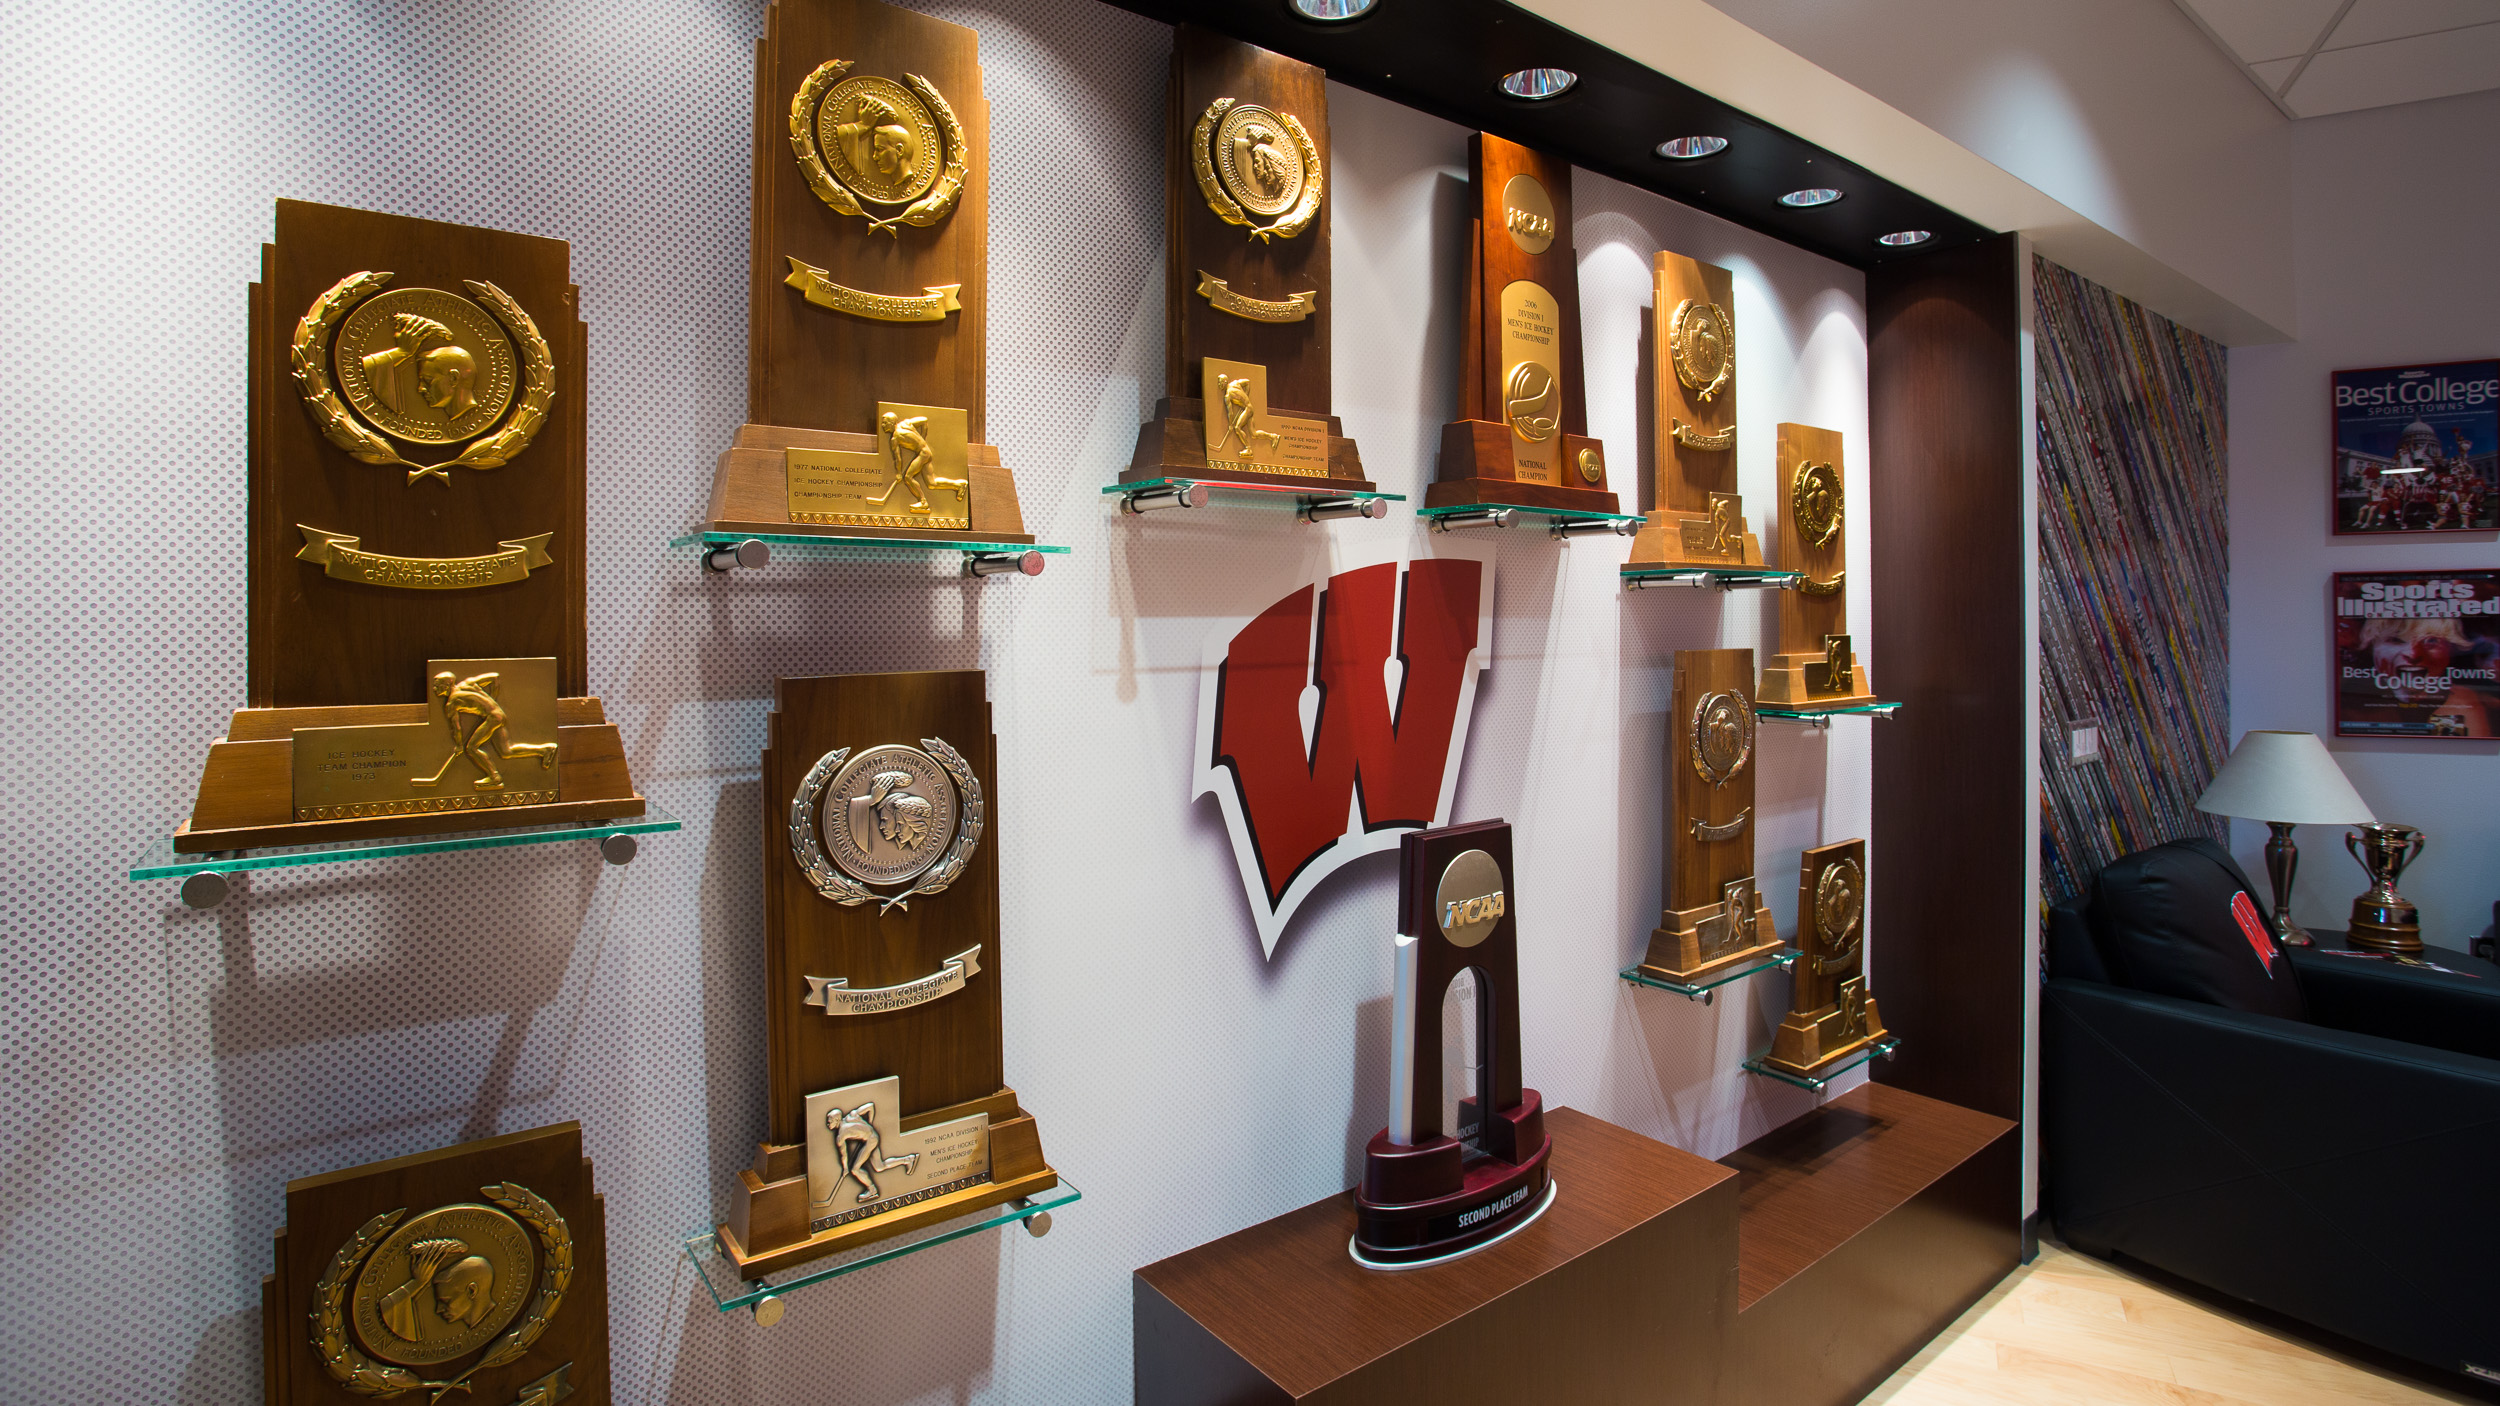 University of Wisconsin - Hockey Offices Trophy Display Detail Photo